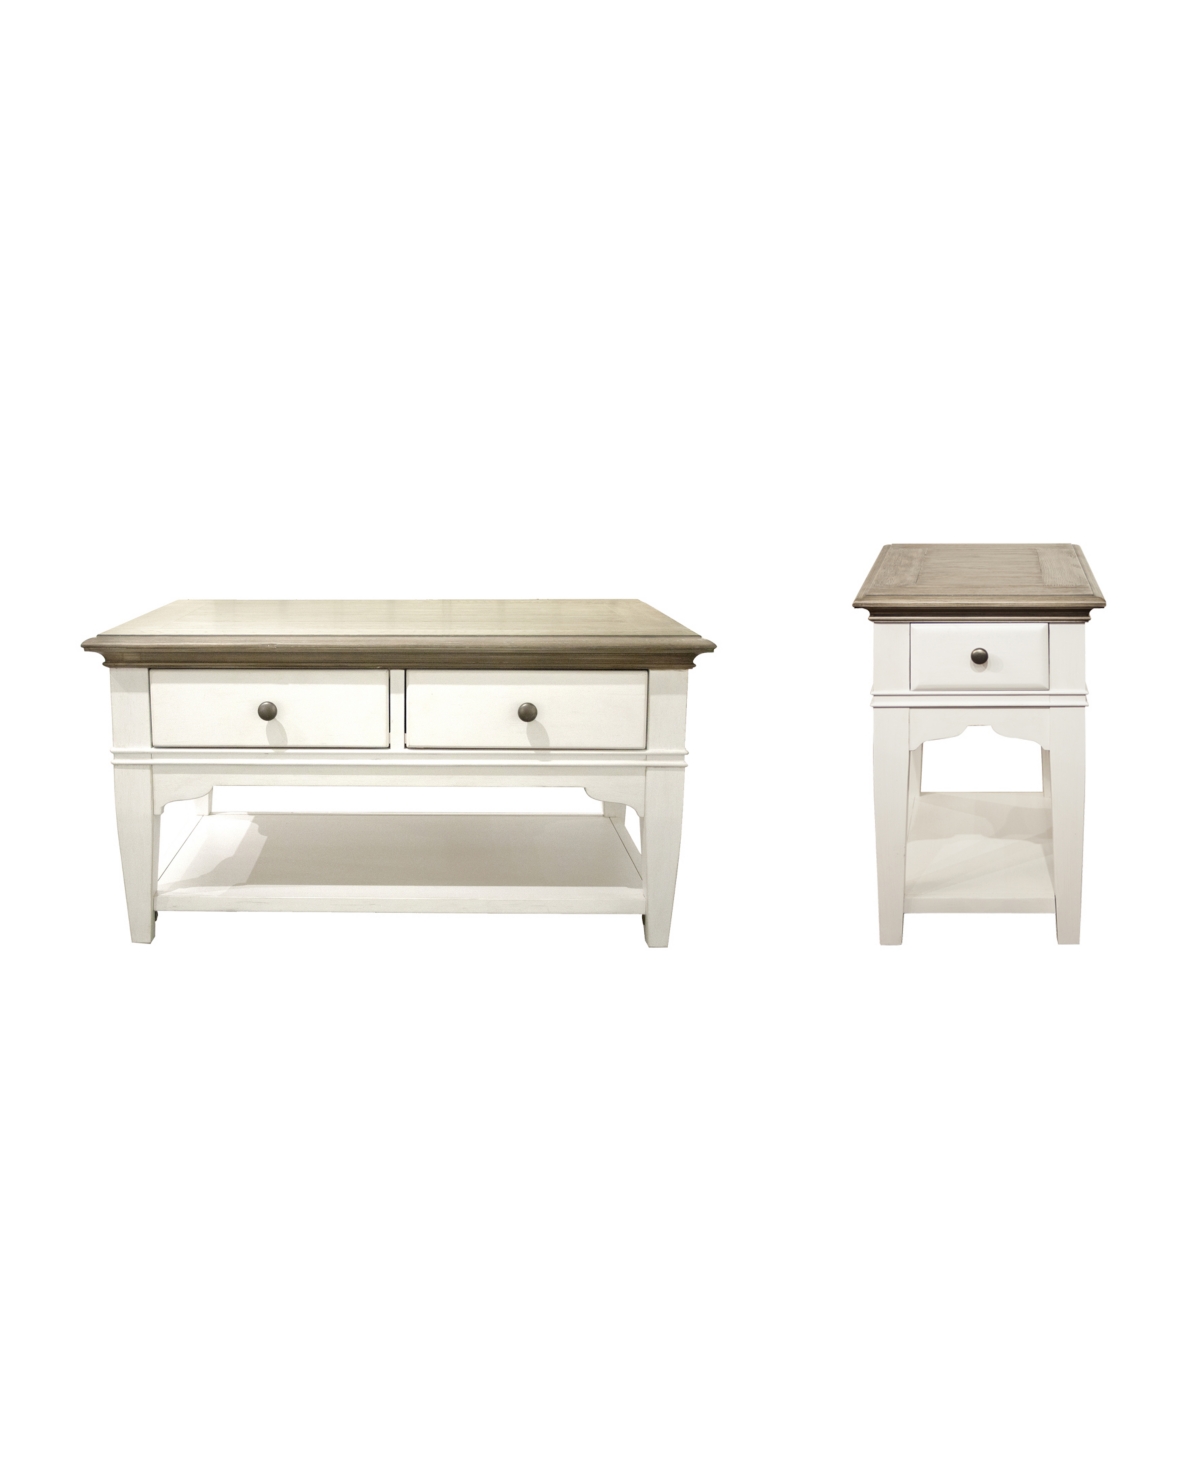 Macy's Myra Small Leg Cocktail Table And Leg End Table Set In Natural,paperwhite